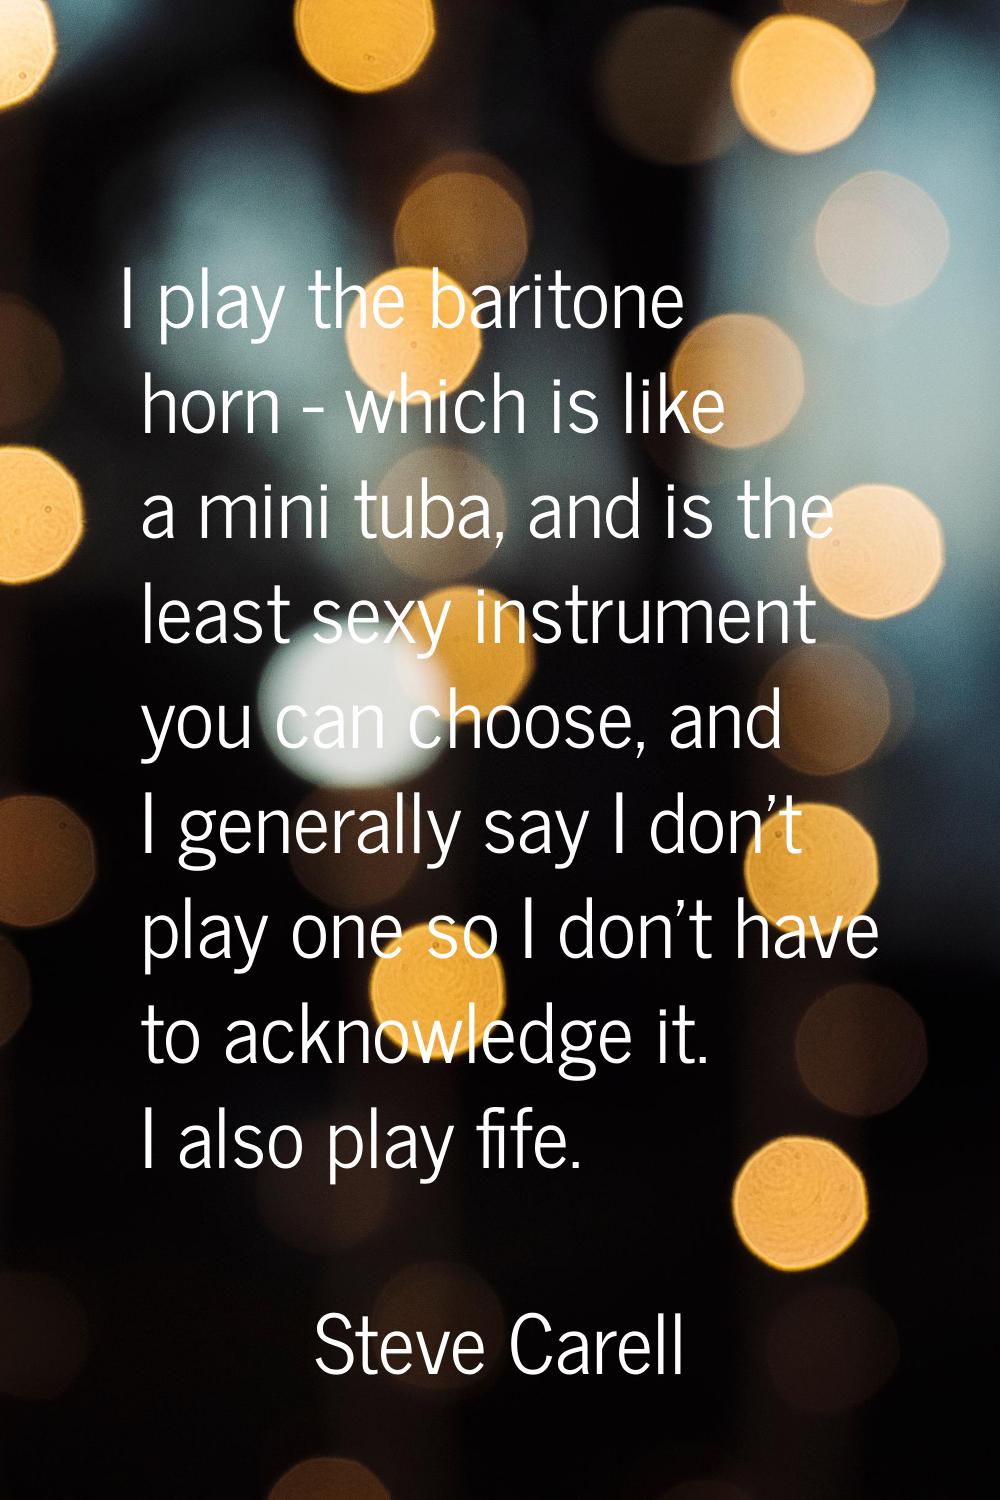 I play the baritone horn - which is like a mini tuba, and is the least sexy instrument you can choo